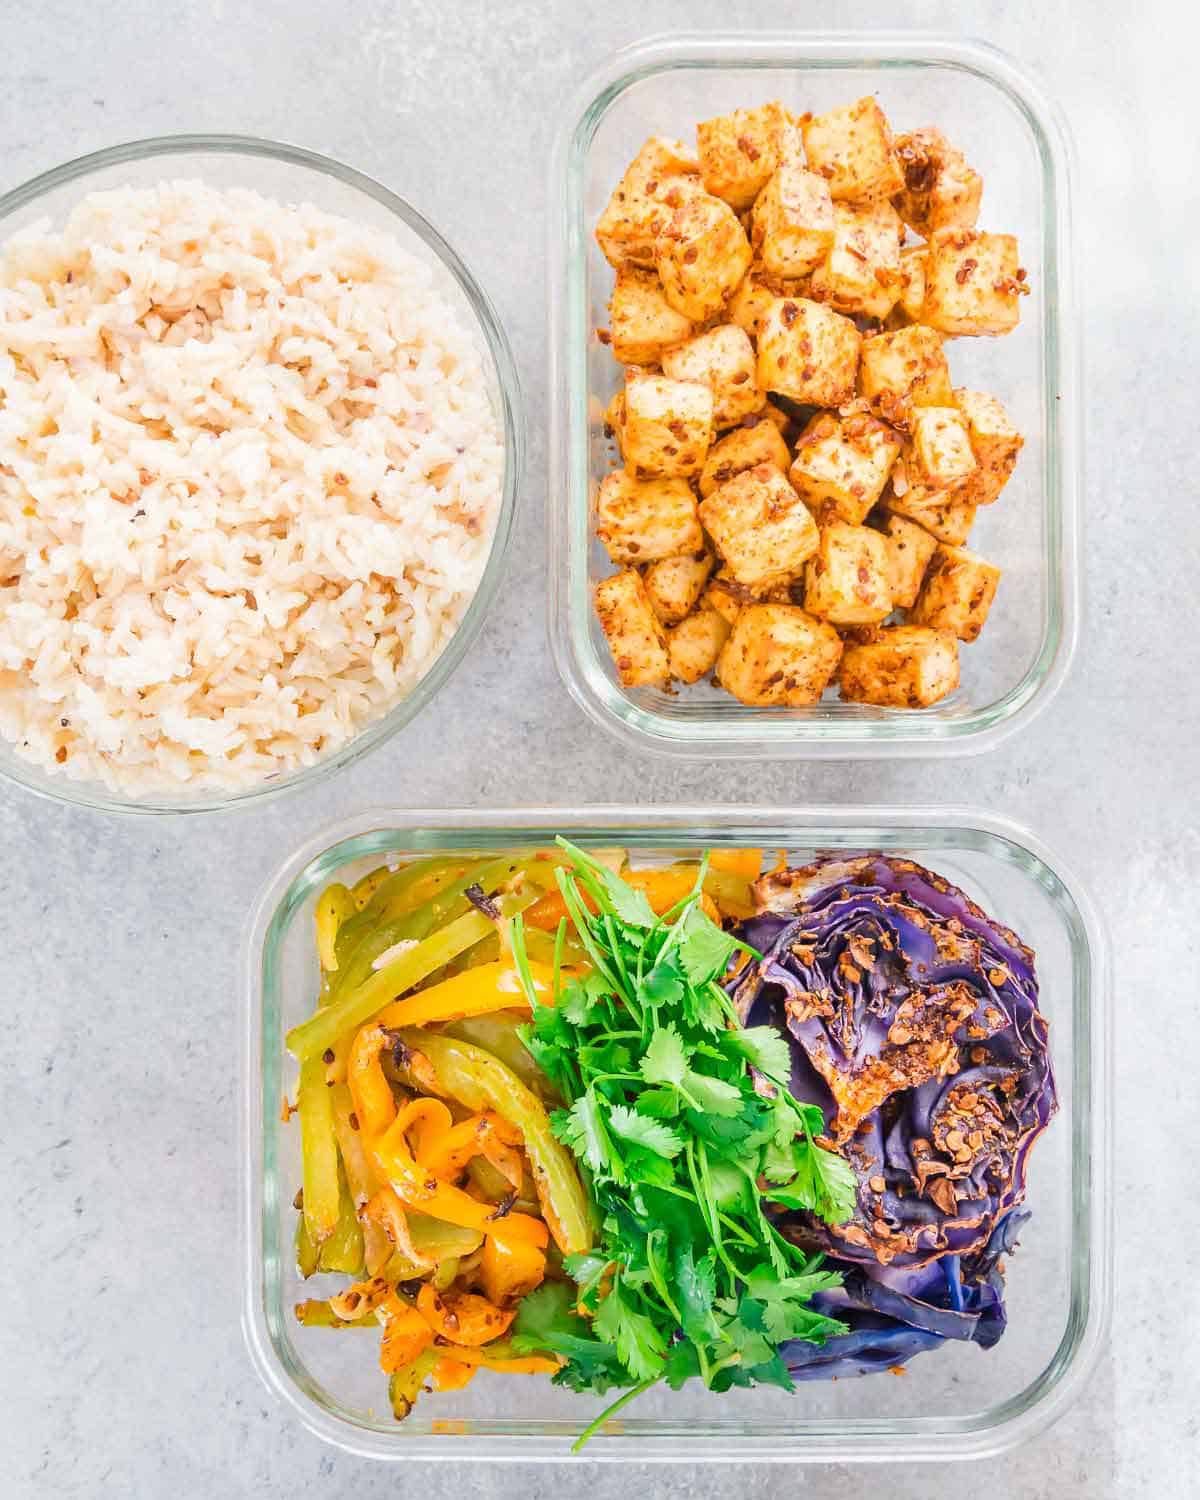 Roast tofu, cabbage, peppers and onions on a sheet pan and make brown rice for an easy plant based meal prep recipe idea.